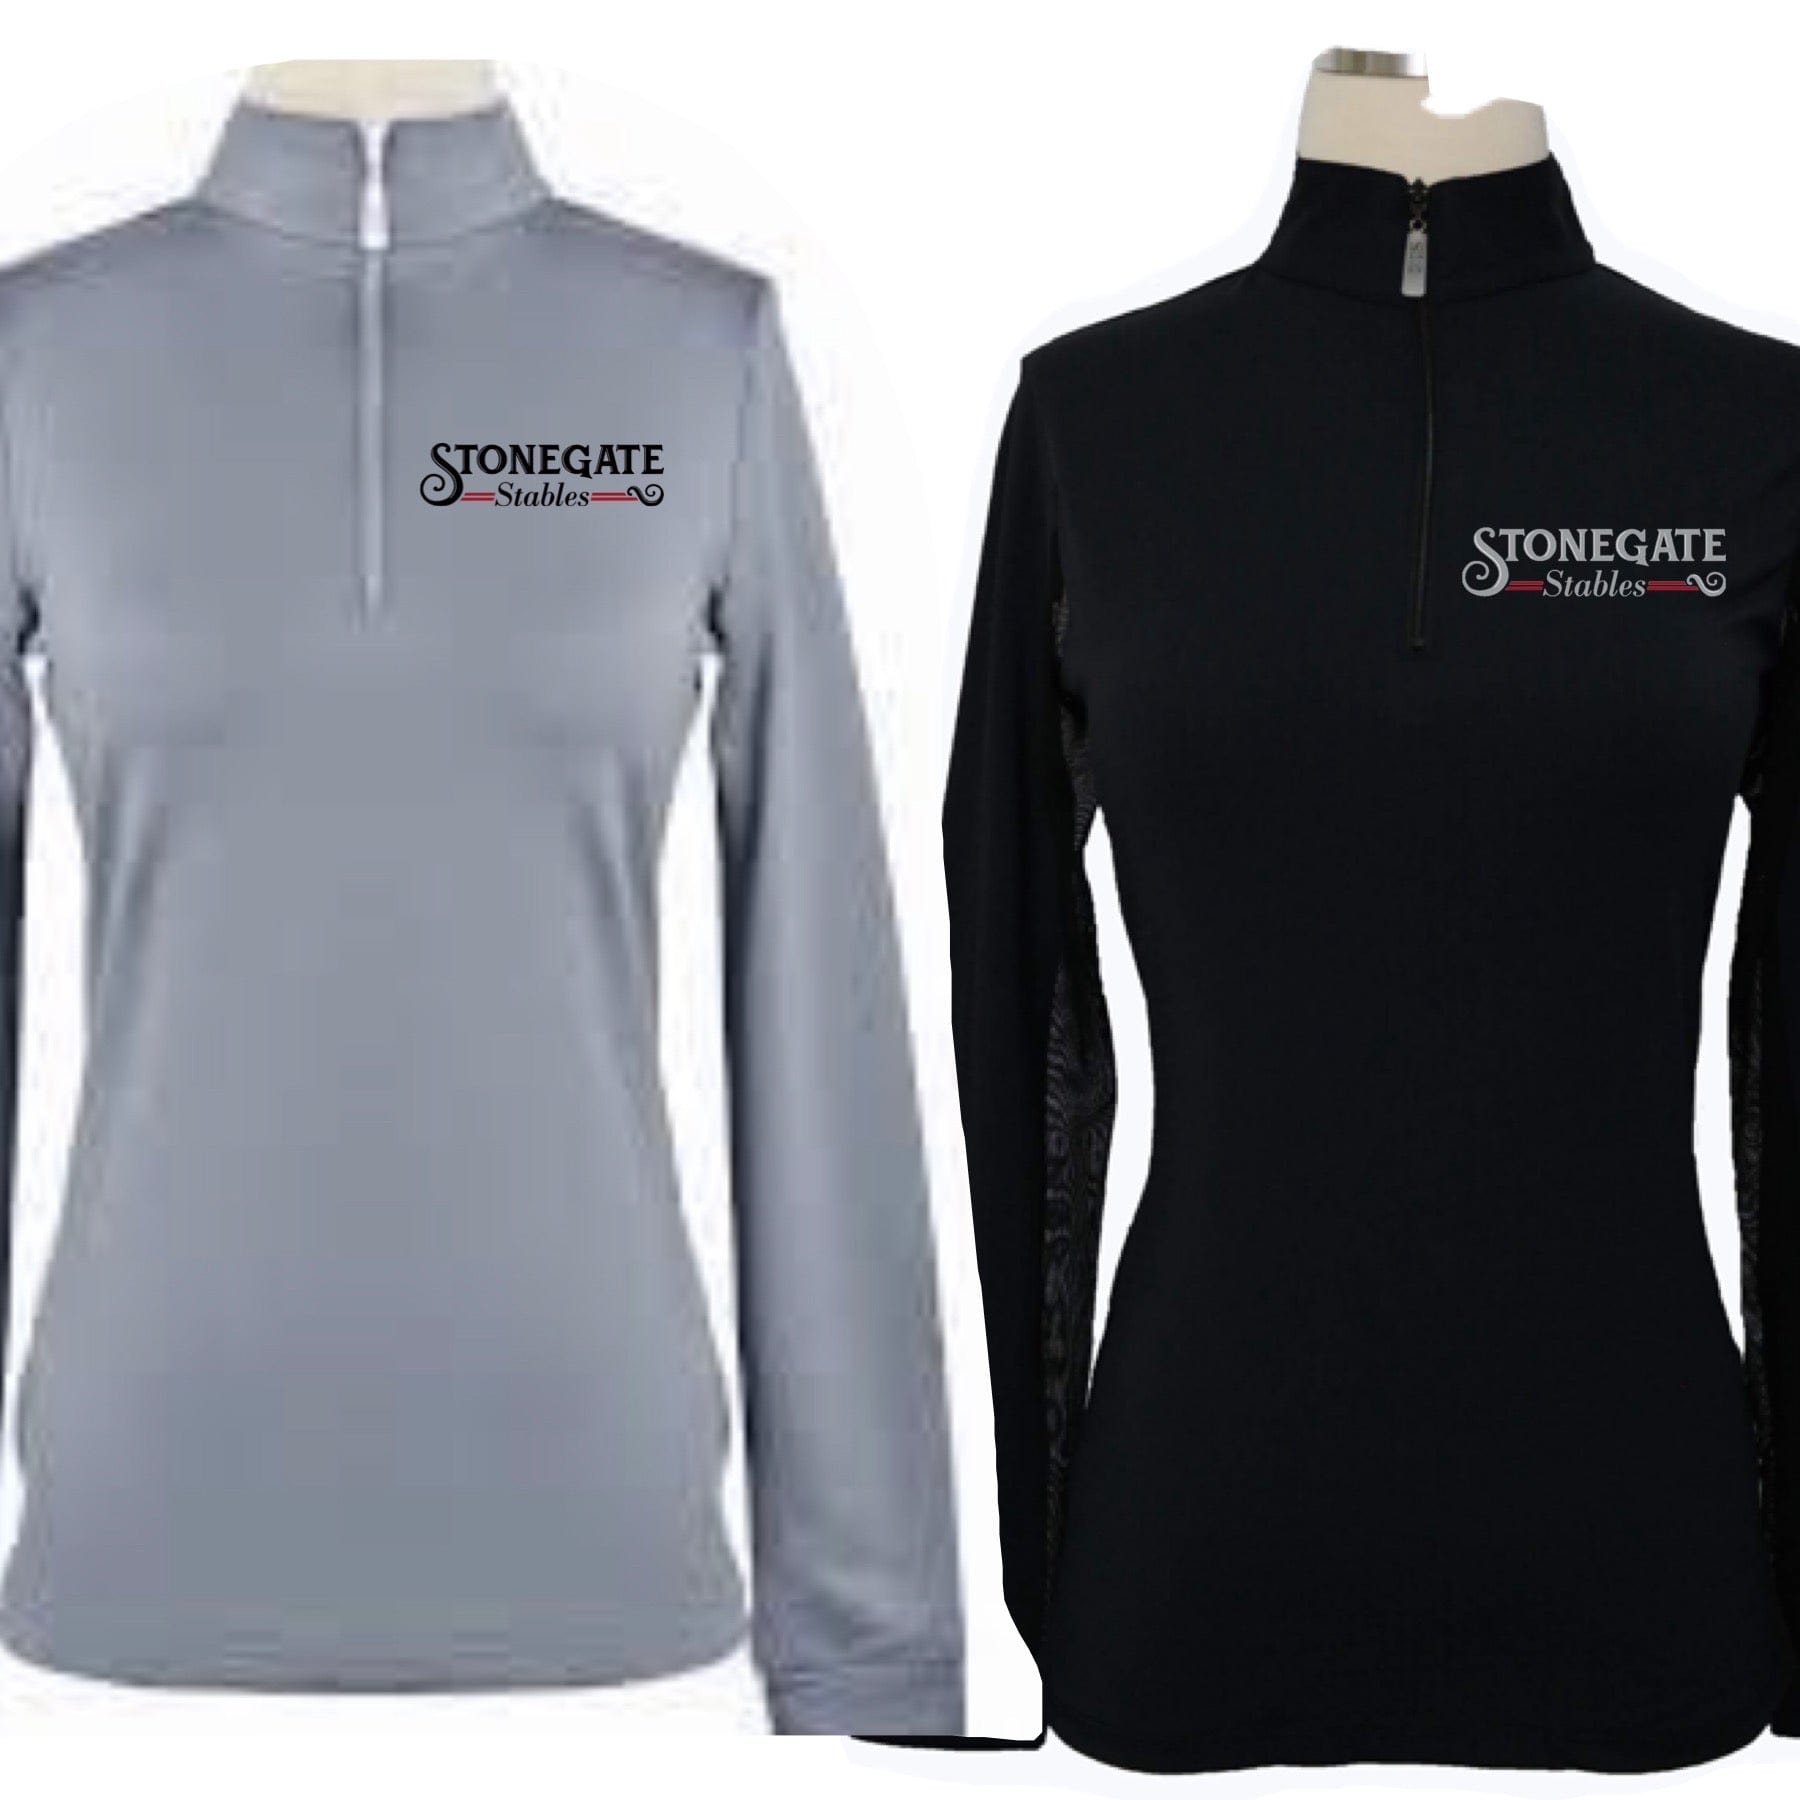 Equestrian Team Apparel Stonegate Stables Sun Shirt equestrian team apparel online tack store mobile tack store custom farm apparel custom show stable clothing equestrian lifestyle horse show clothing riding clothes horses equestrian tack store